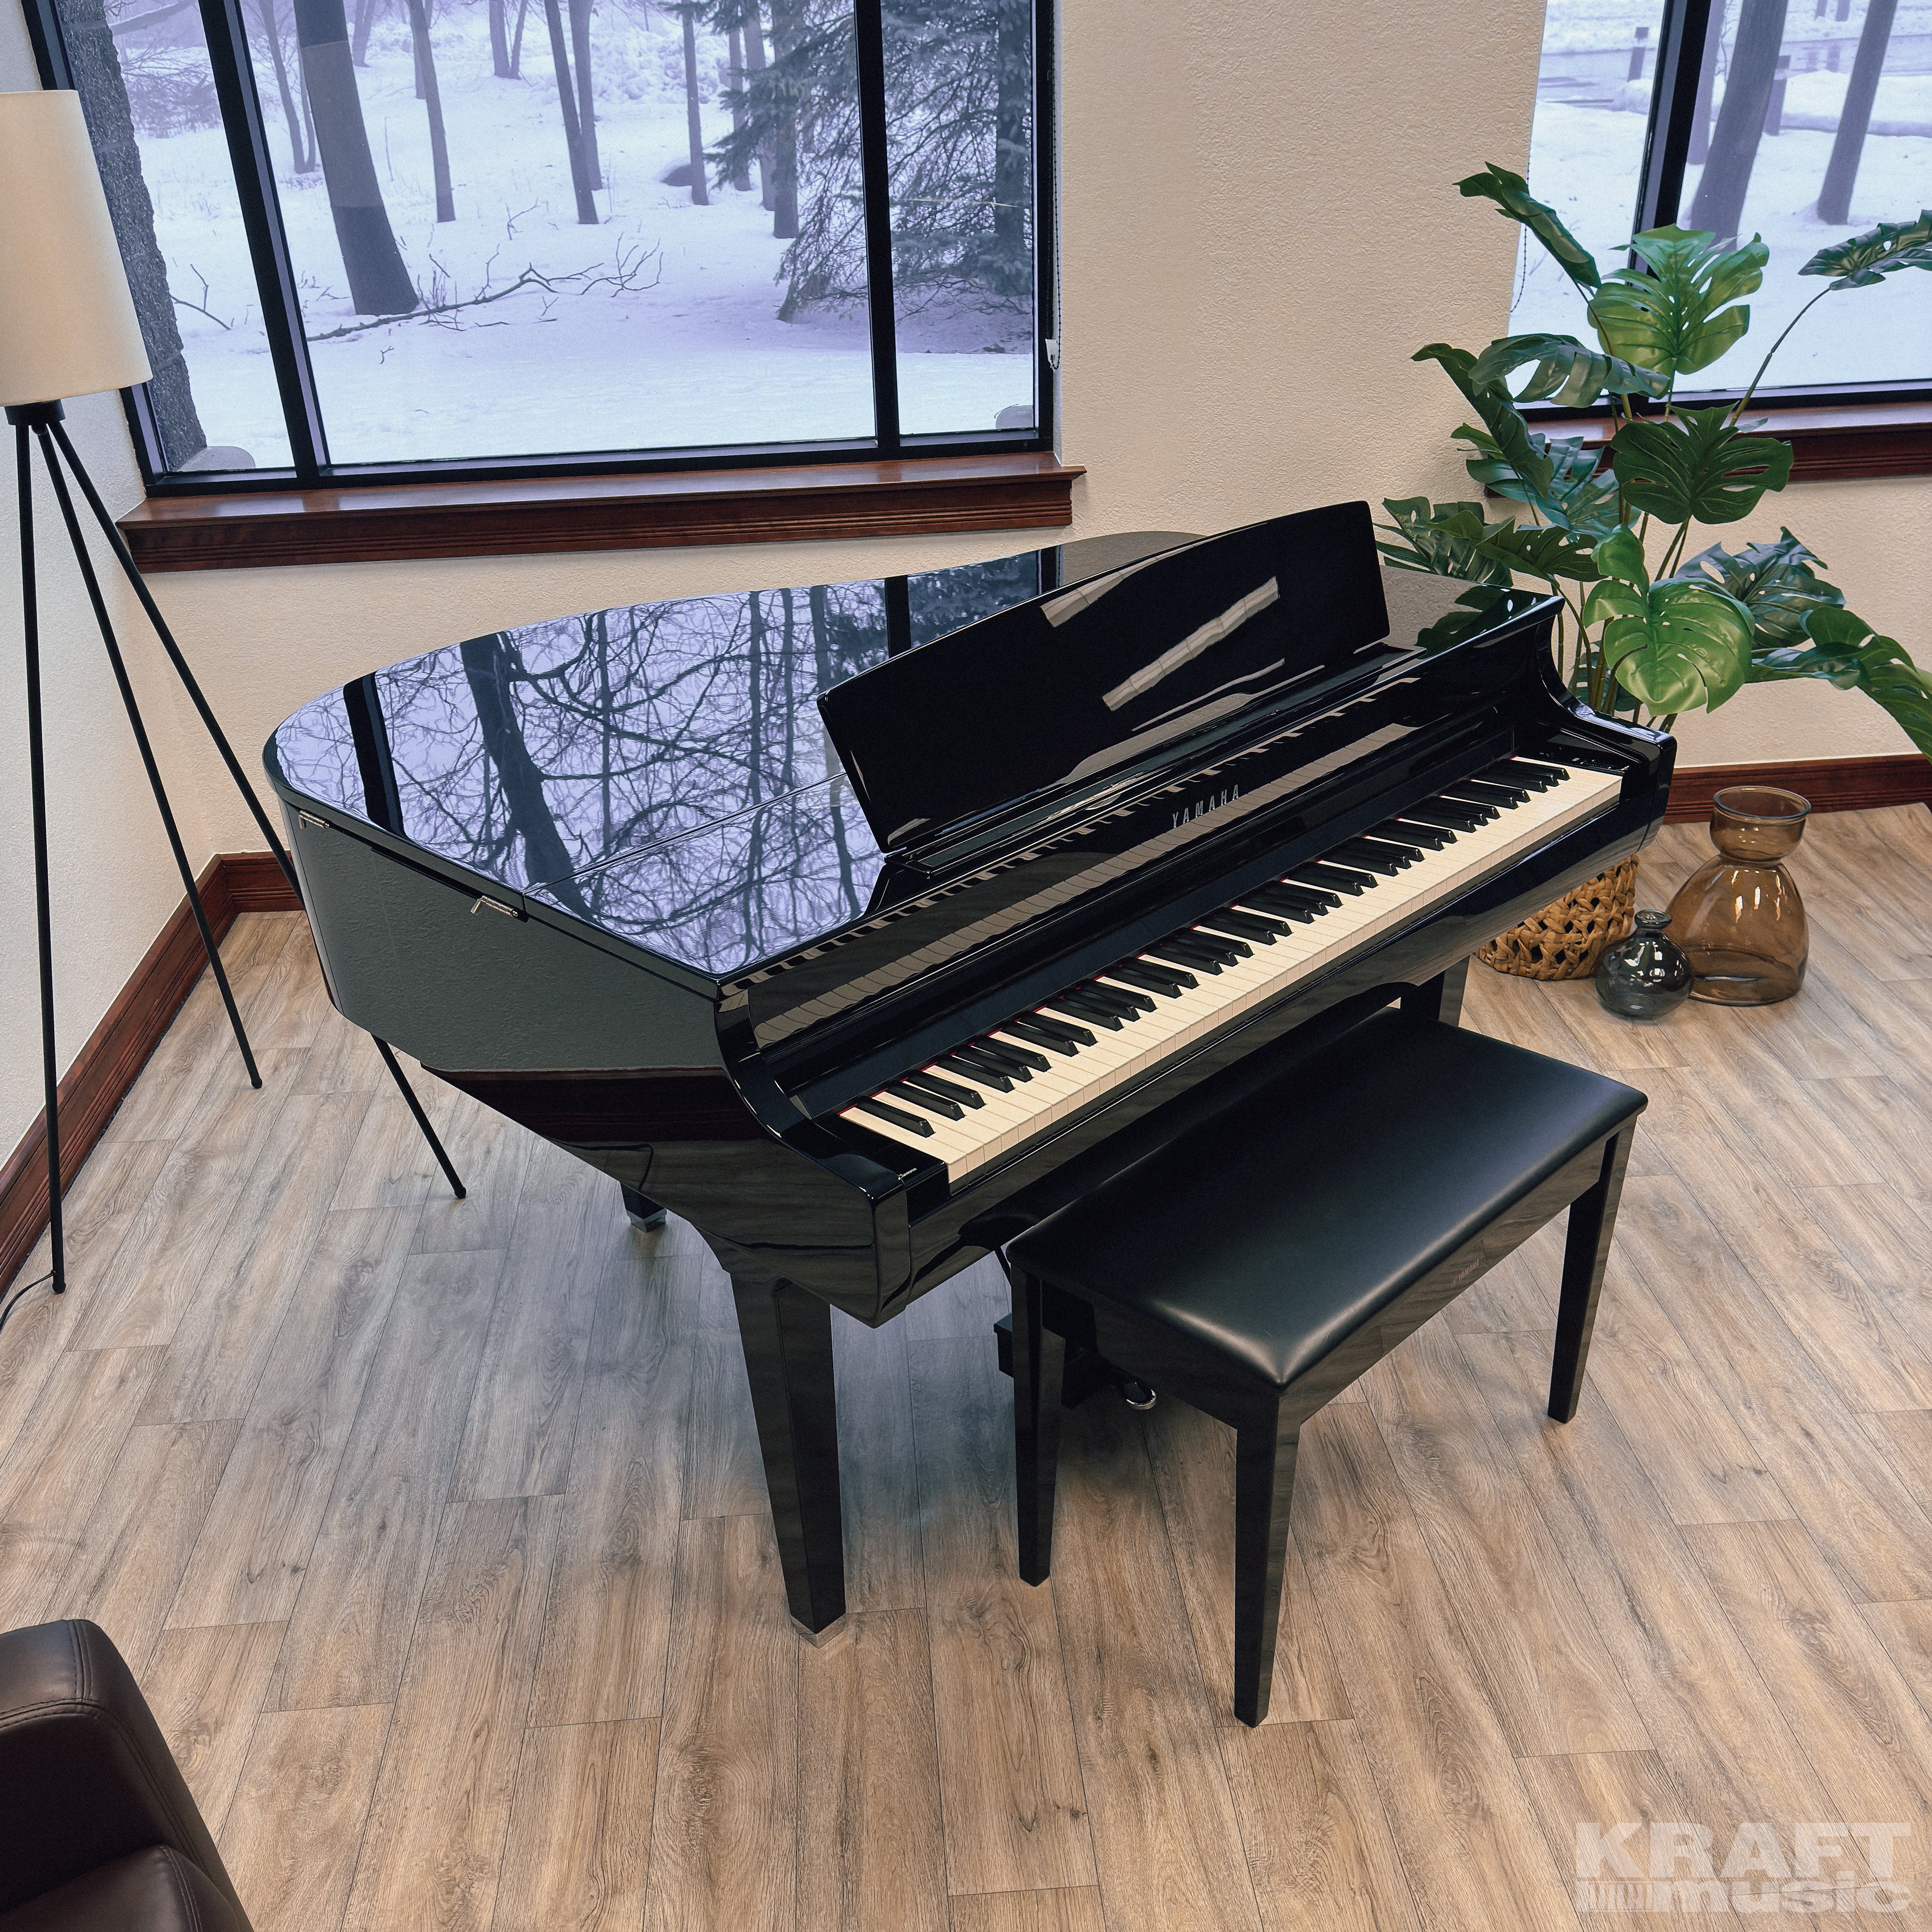 Yamaha Clavinova CSP-295GP Digital Grand Piano - Polished Ebony - in a stylish music room facing right with lid closed from above